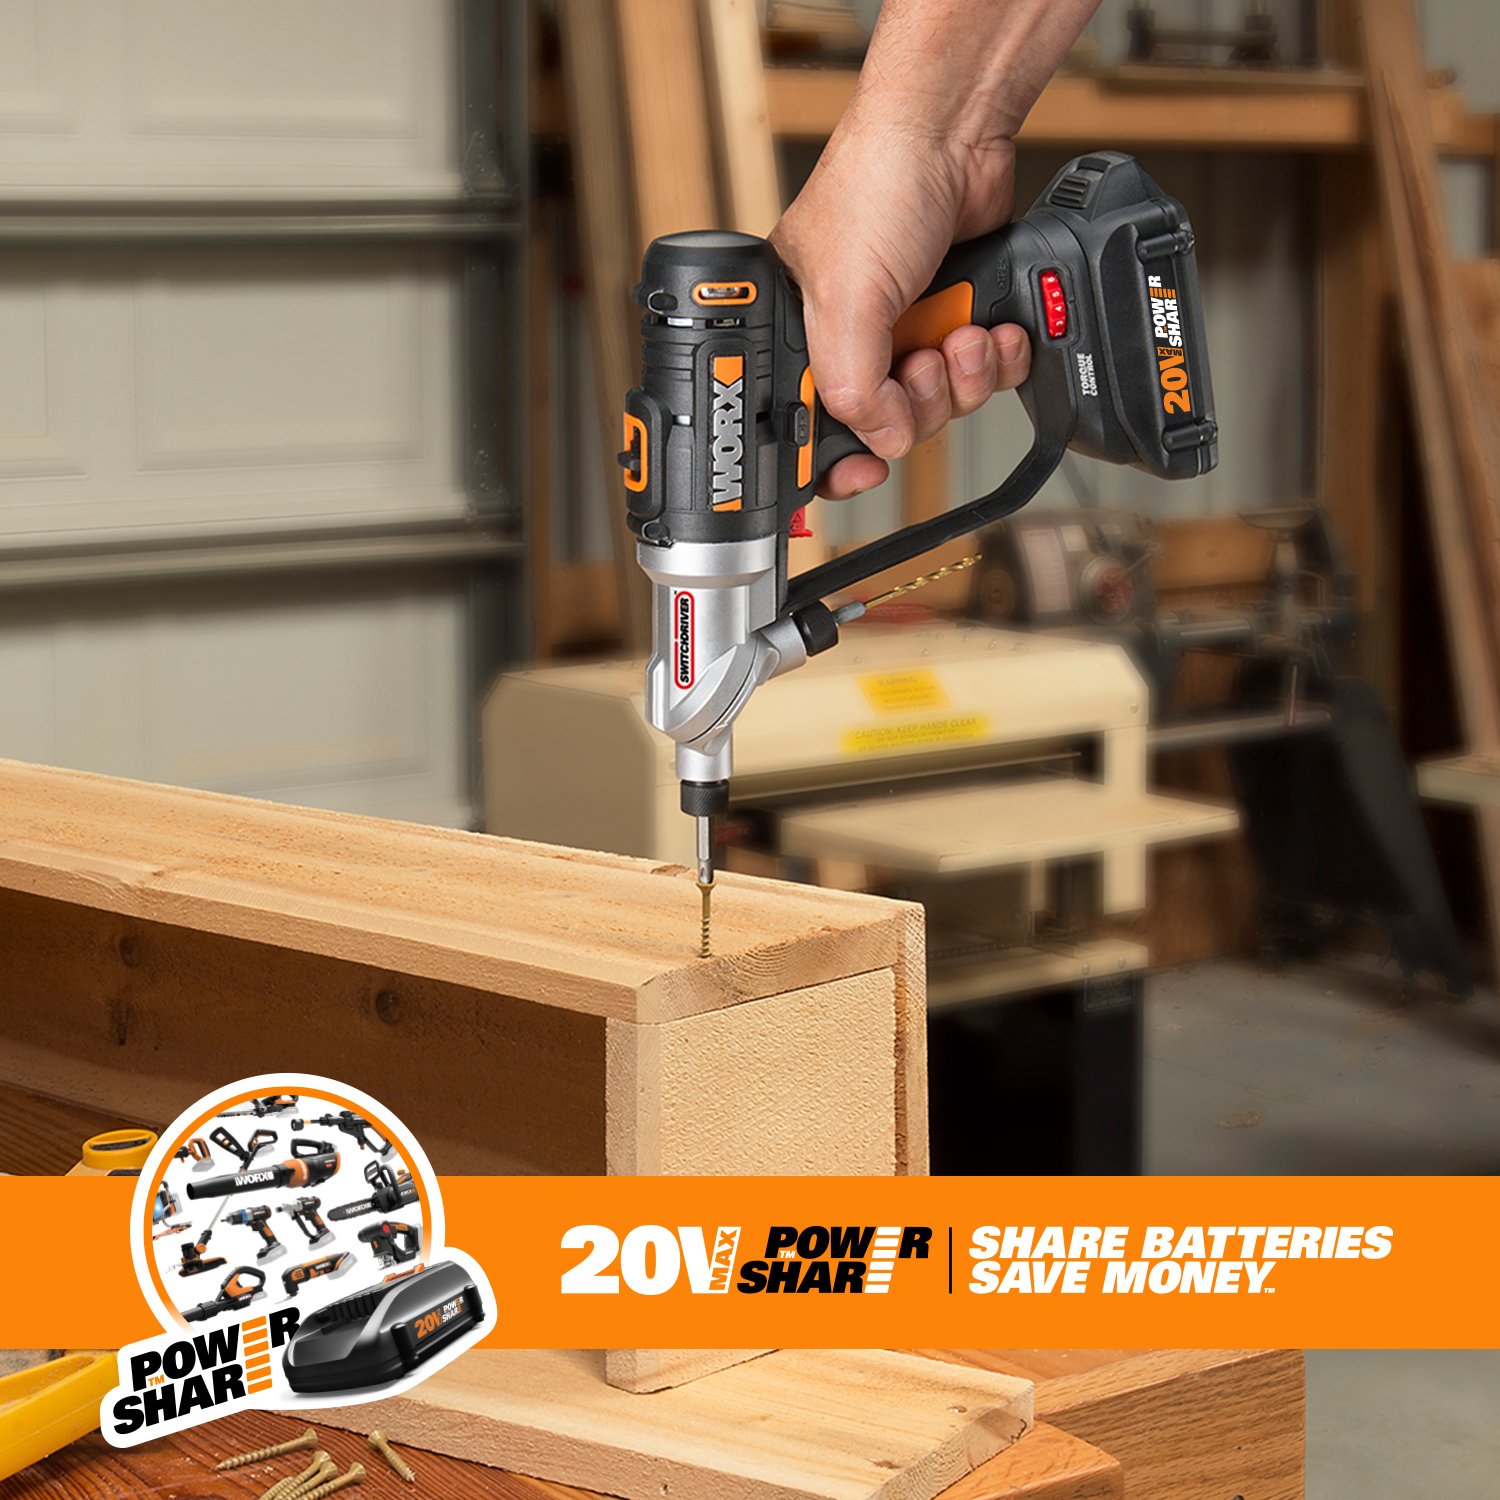 Worx WX176L.9 20V Power Share Switchdriver 2-in-1 Cordless Drill & Driver (Tool Only)